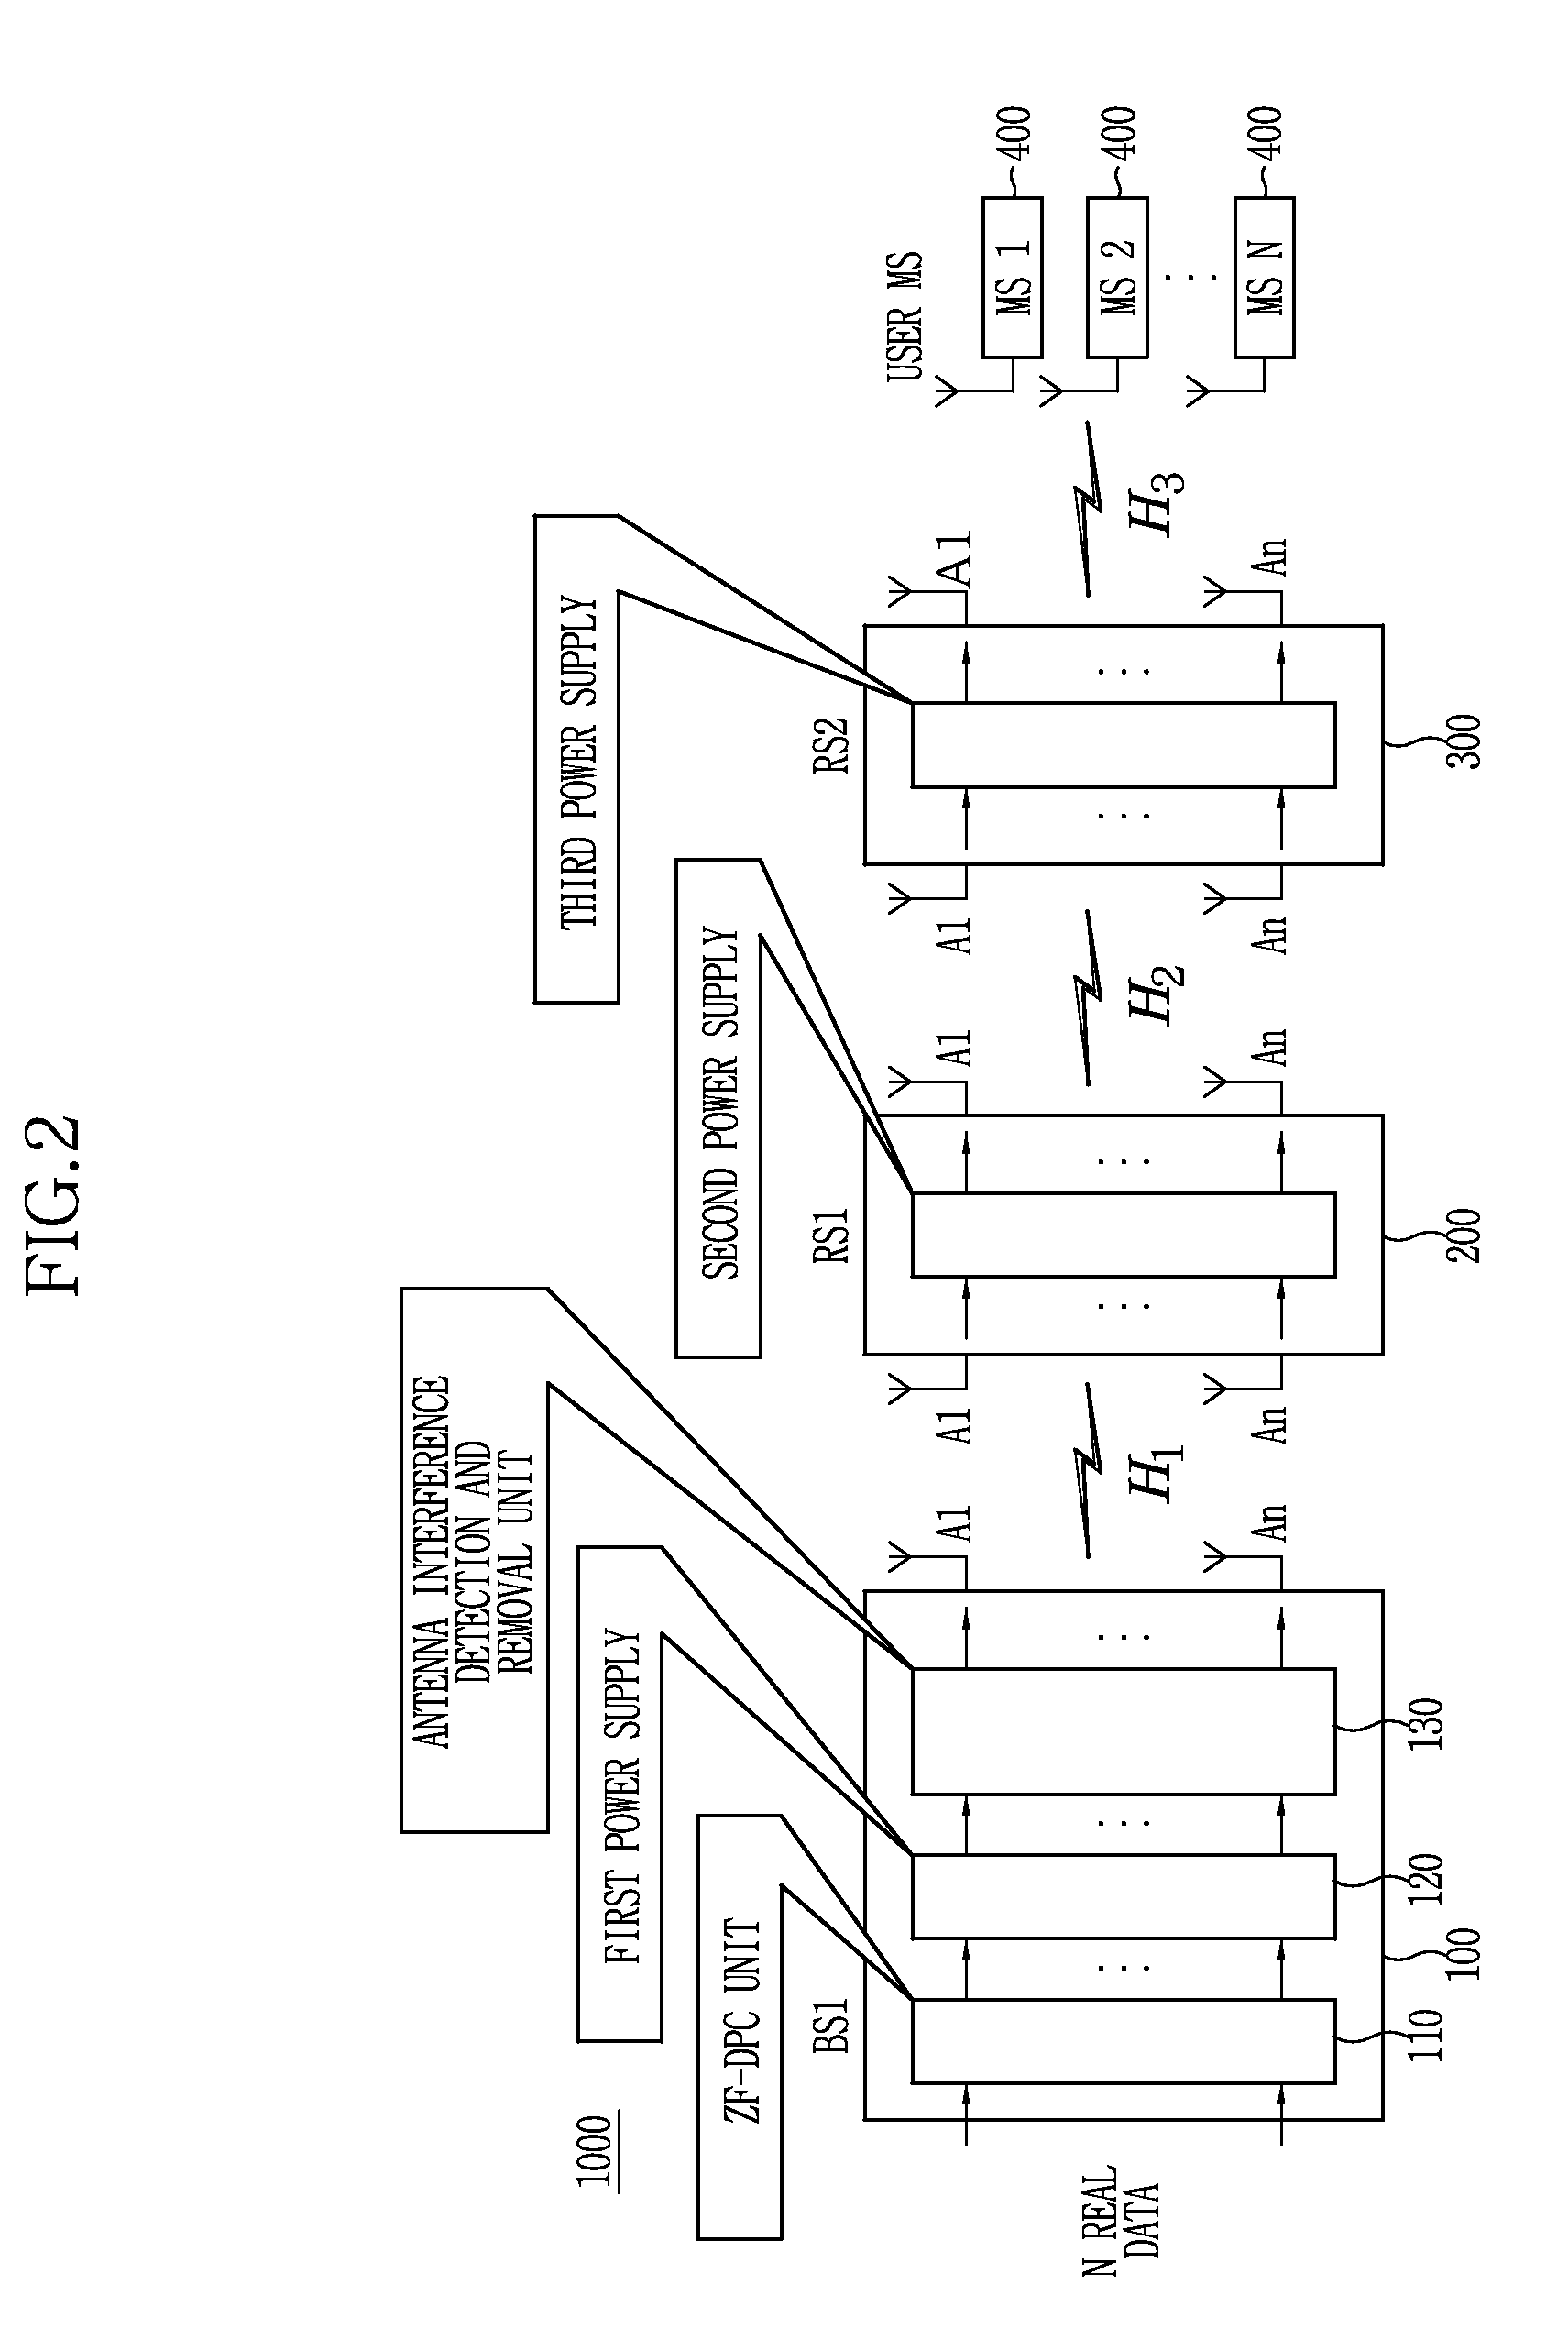 Multiple-input multiple-output relay system and method